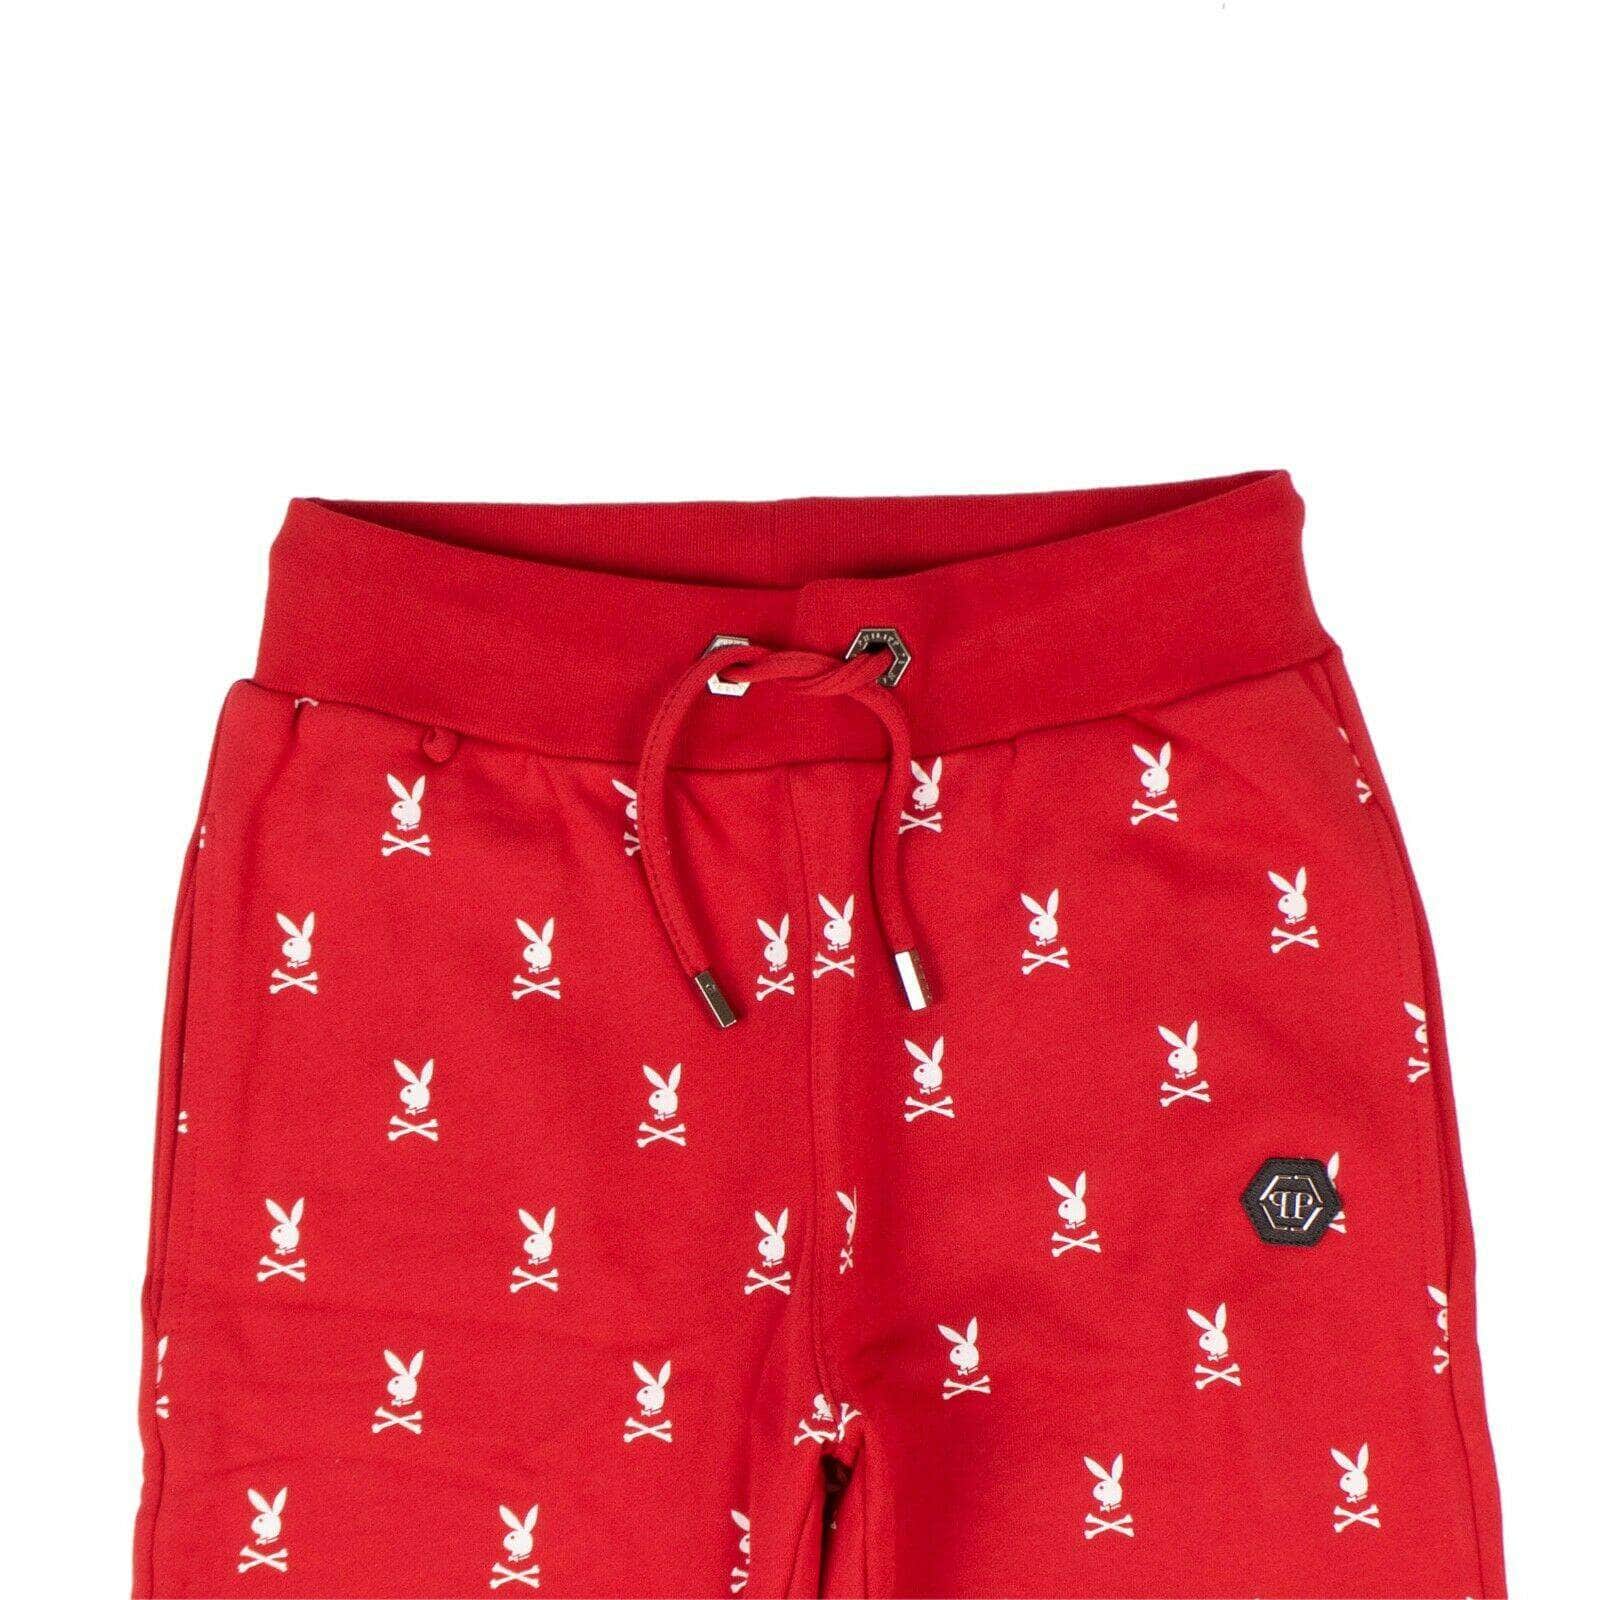 Philipp Plein 250-500, channelenable-all, chicmi, couponcollection, gender-mens, main-clothing, mens-joggers-sweatpants, mens-shoes, philipp-plein, size-3xl, size-4xl, size-xl, size-xxl PHILIPP PLEIN x PLAYBOY Red Skull Bunny Print Jogging Sweatpants